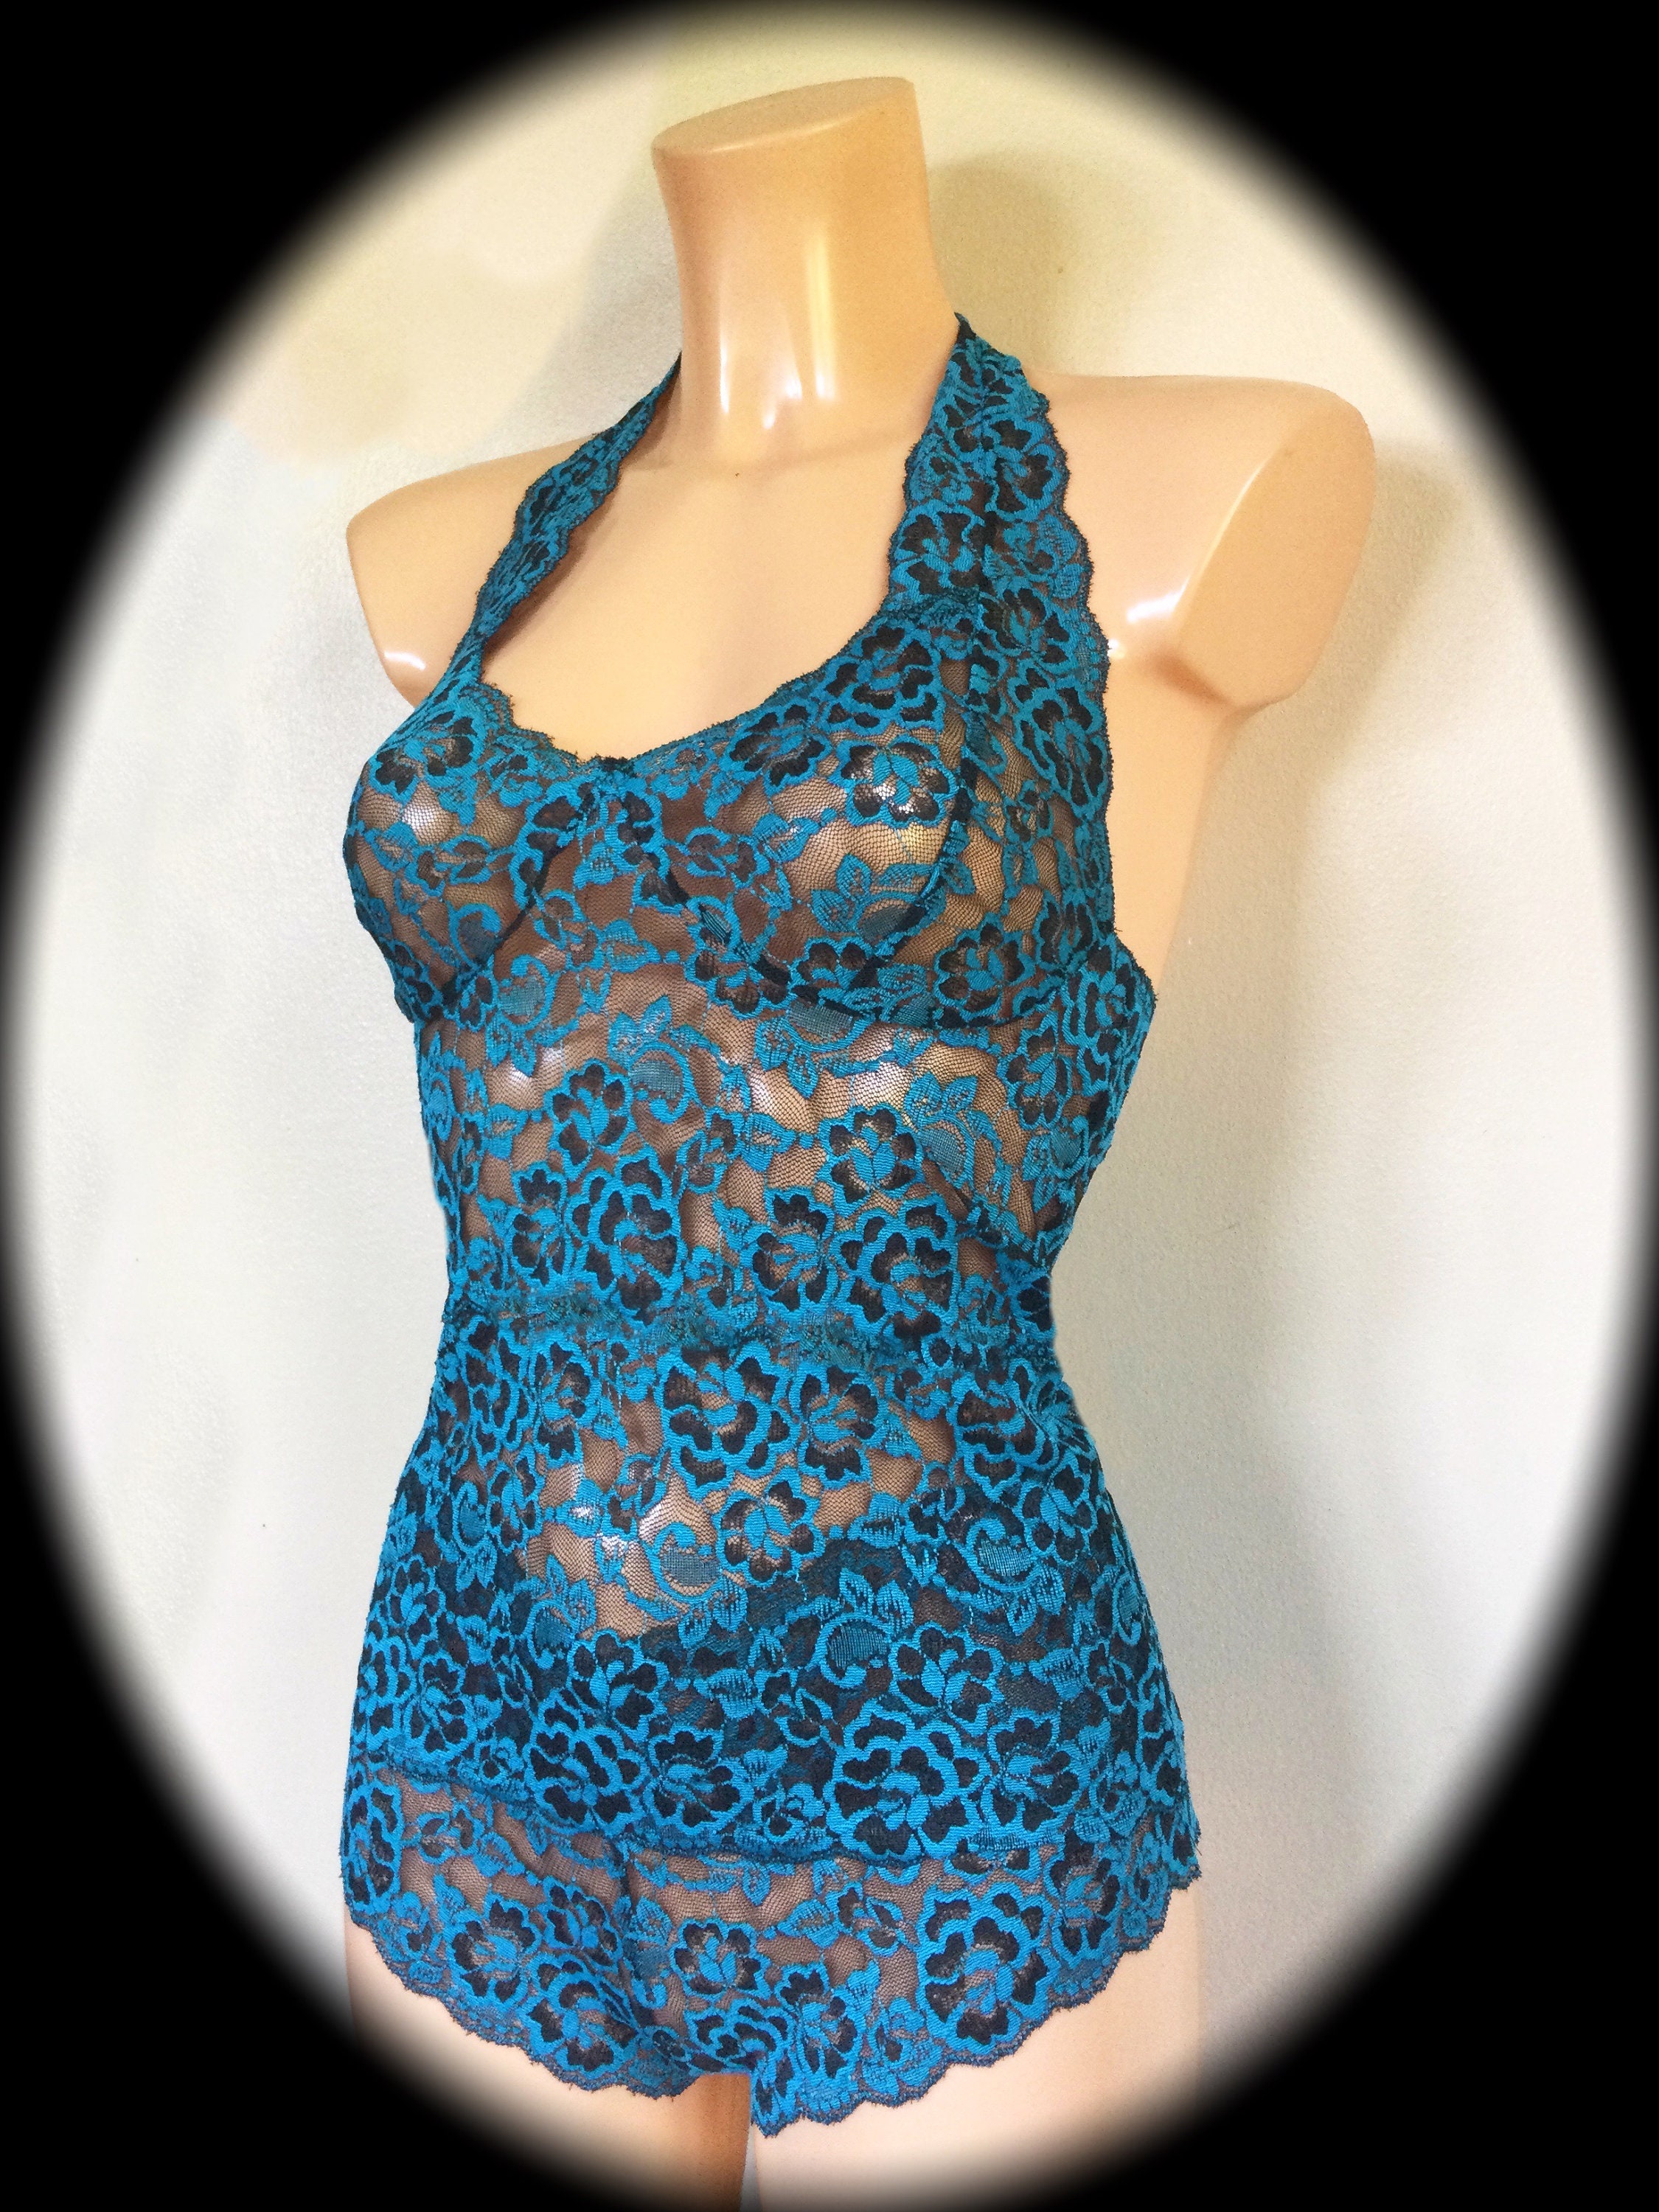 Halter Balconette Camisole in Silky Stretch Lace by Fidditch - Etsy UK